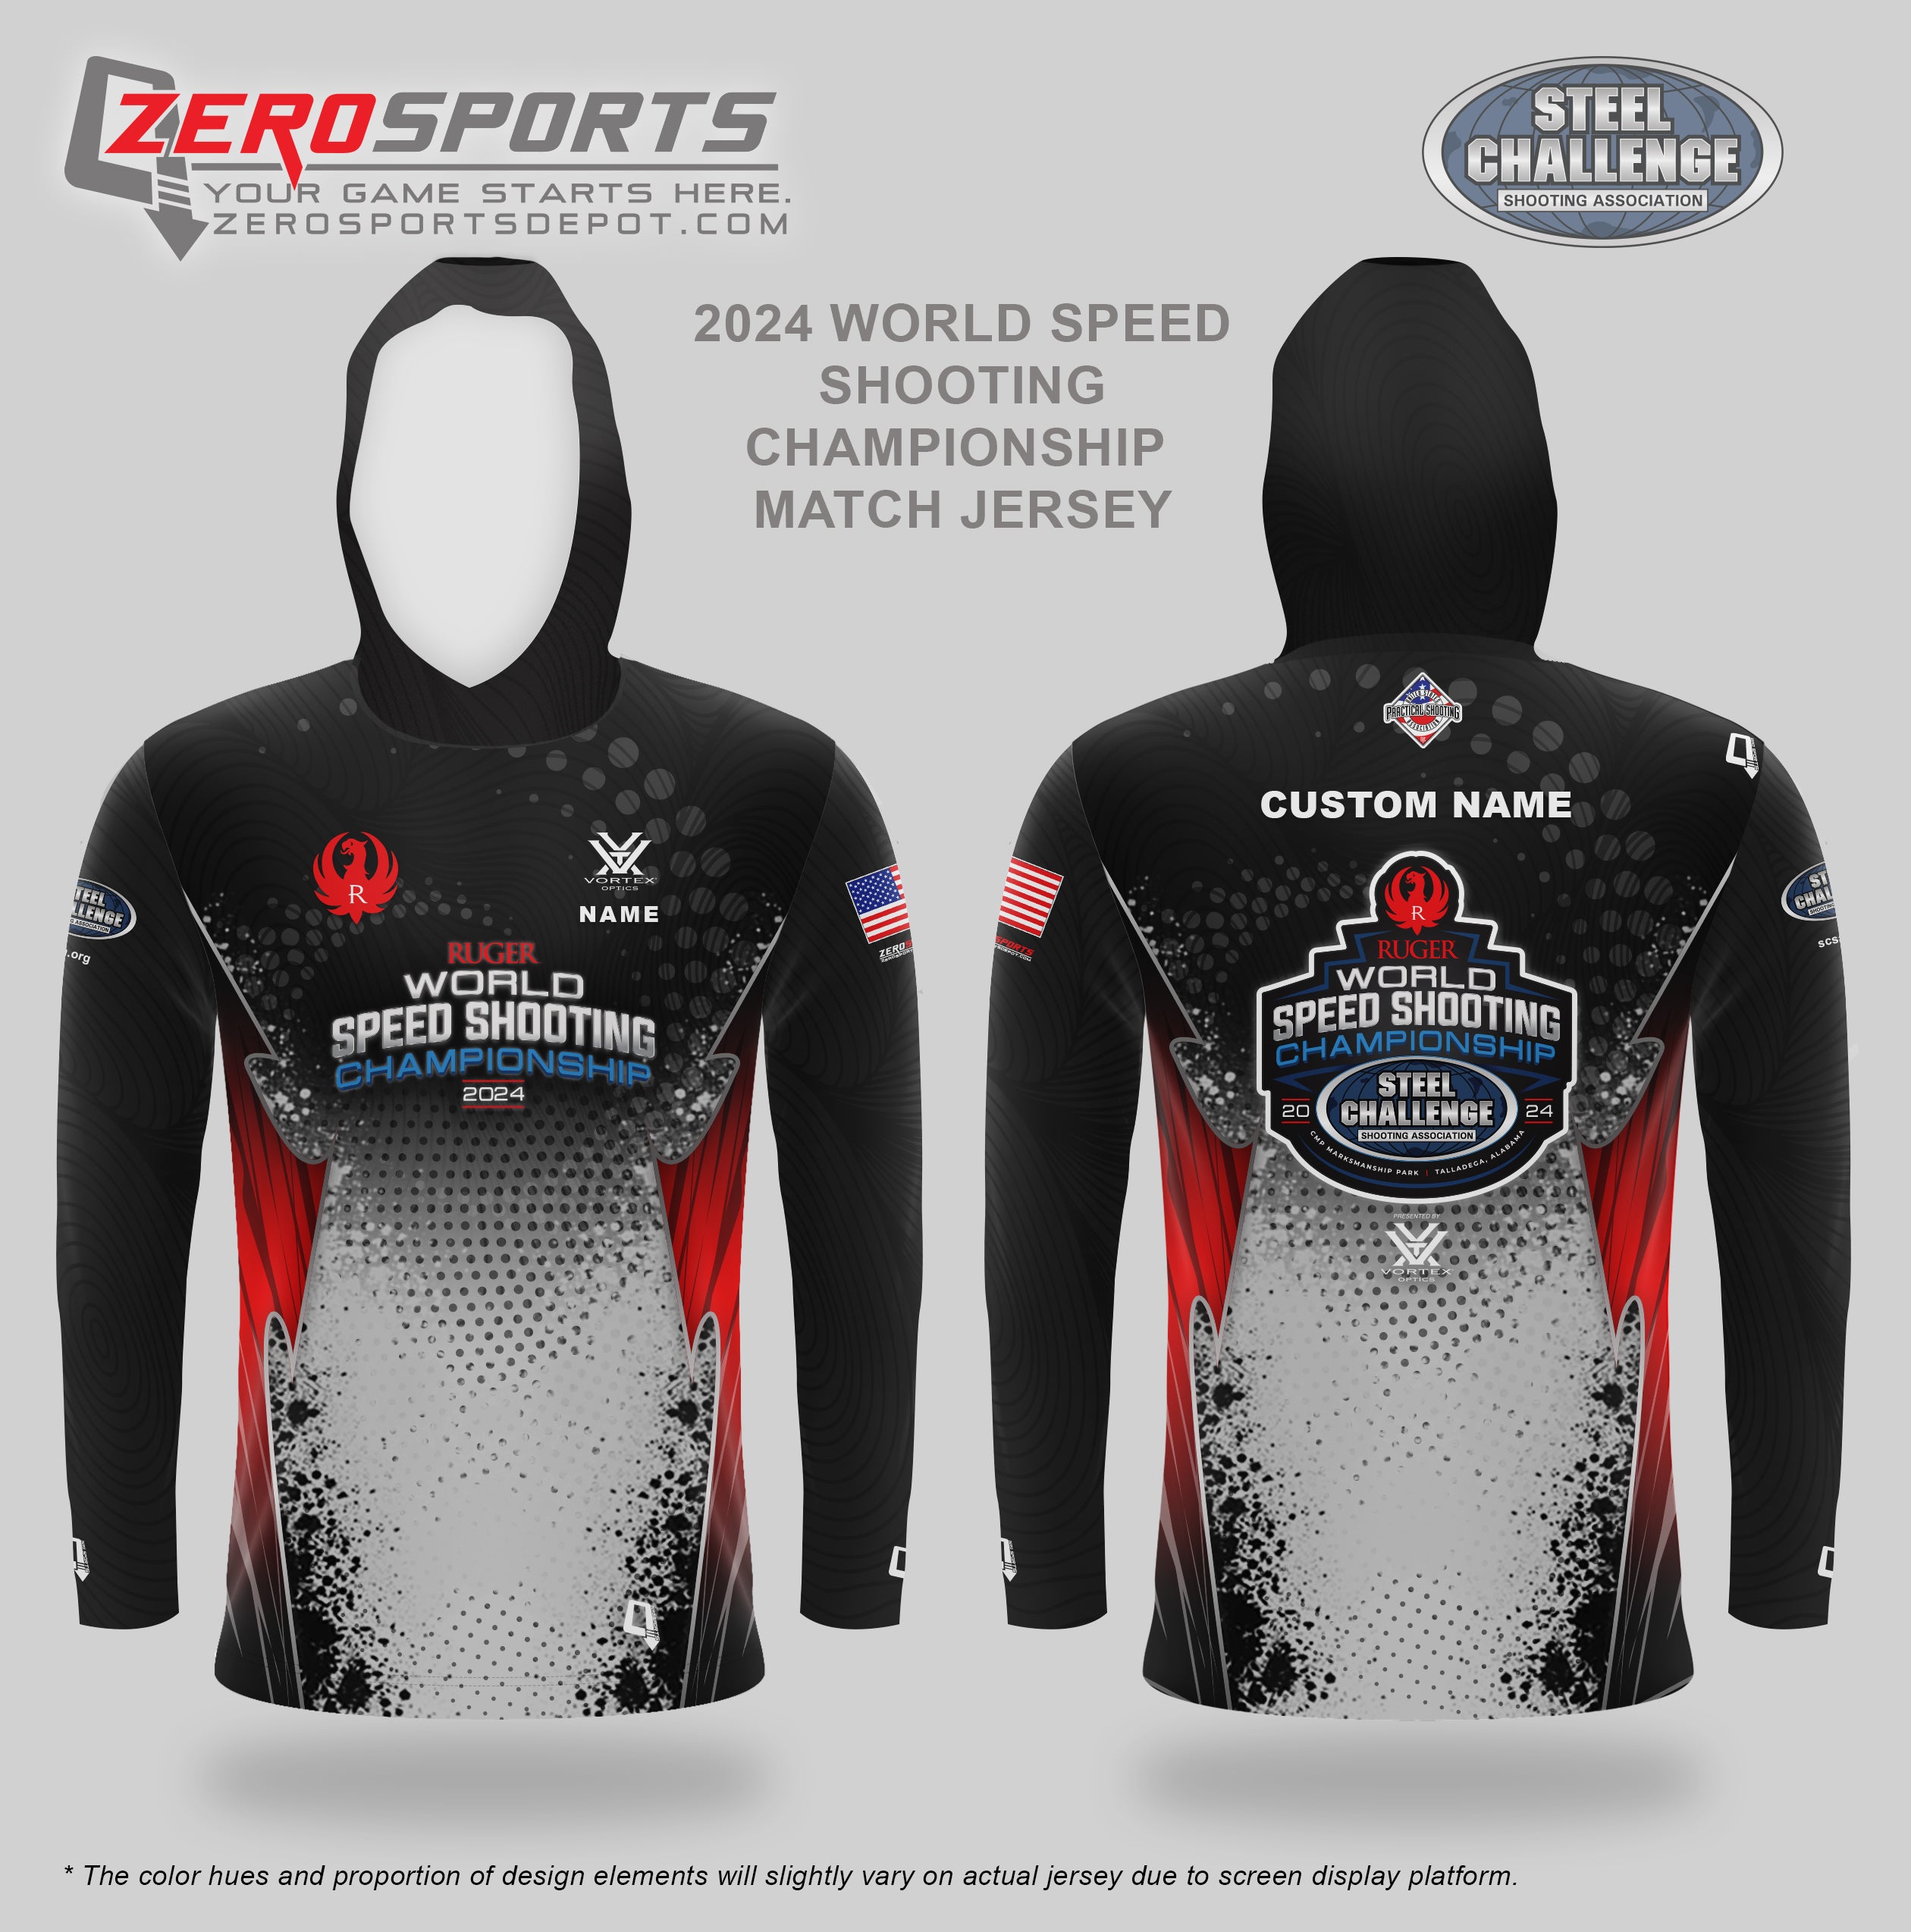 The Ruger 2024 World Speed Shooting Championship presented by Vortex Optics Match Jersey  **All orders after 4/12/2024 will be shipped directly to your address after the match.